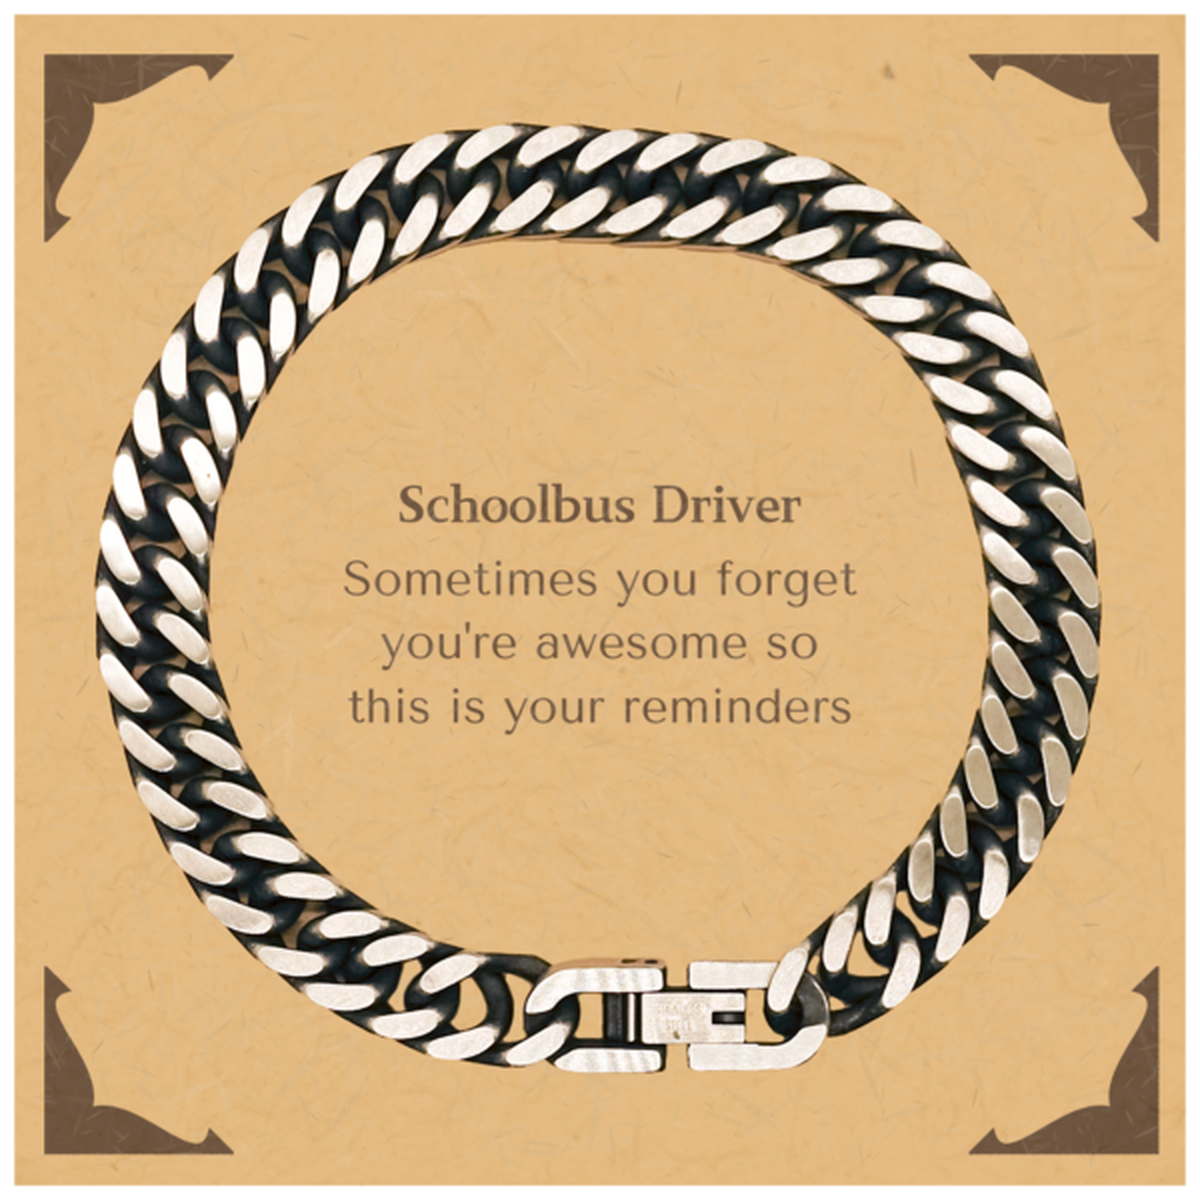 Sentimental Schoolbus Driver Cuban Link Chain Bracelet, Schoolbus Driver Sometimes you forget you're awesome so this is your reminders, Graduation Christmas Birthday Gifts for Schoolbus Driver, Men, Women, Coworkers